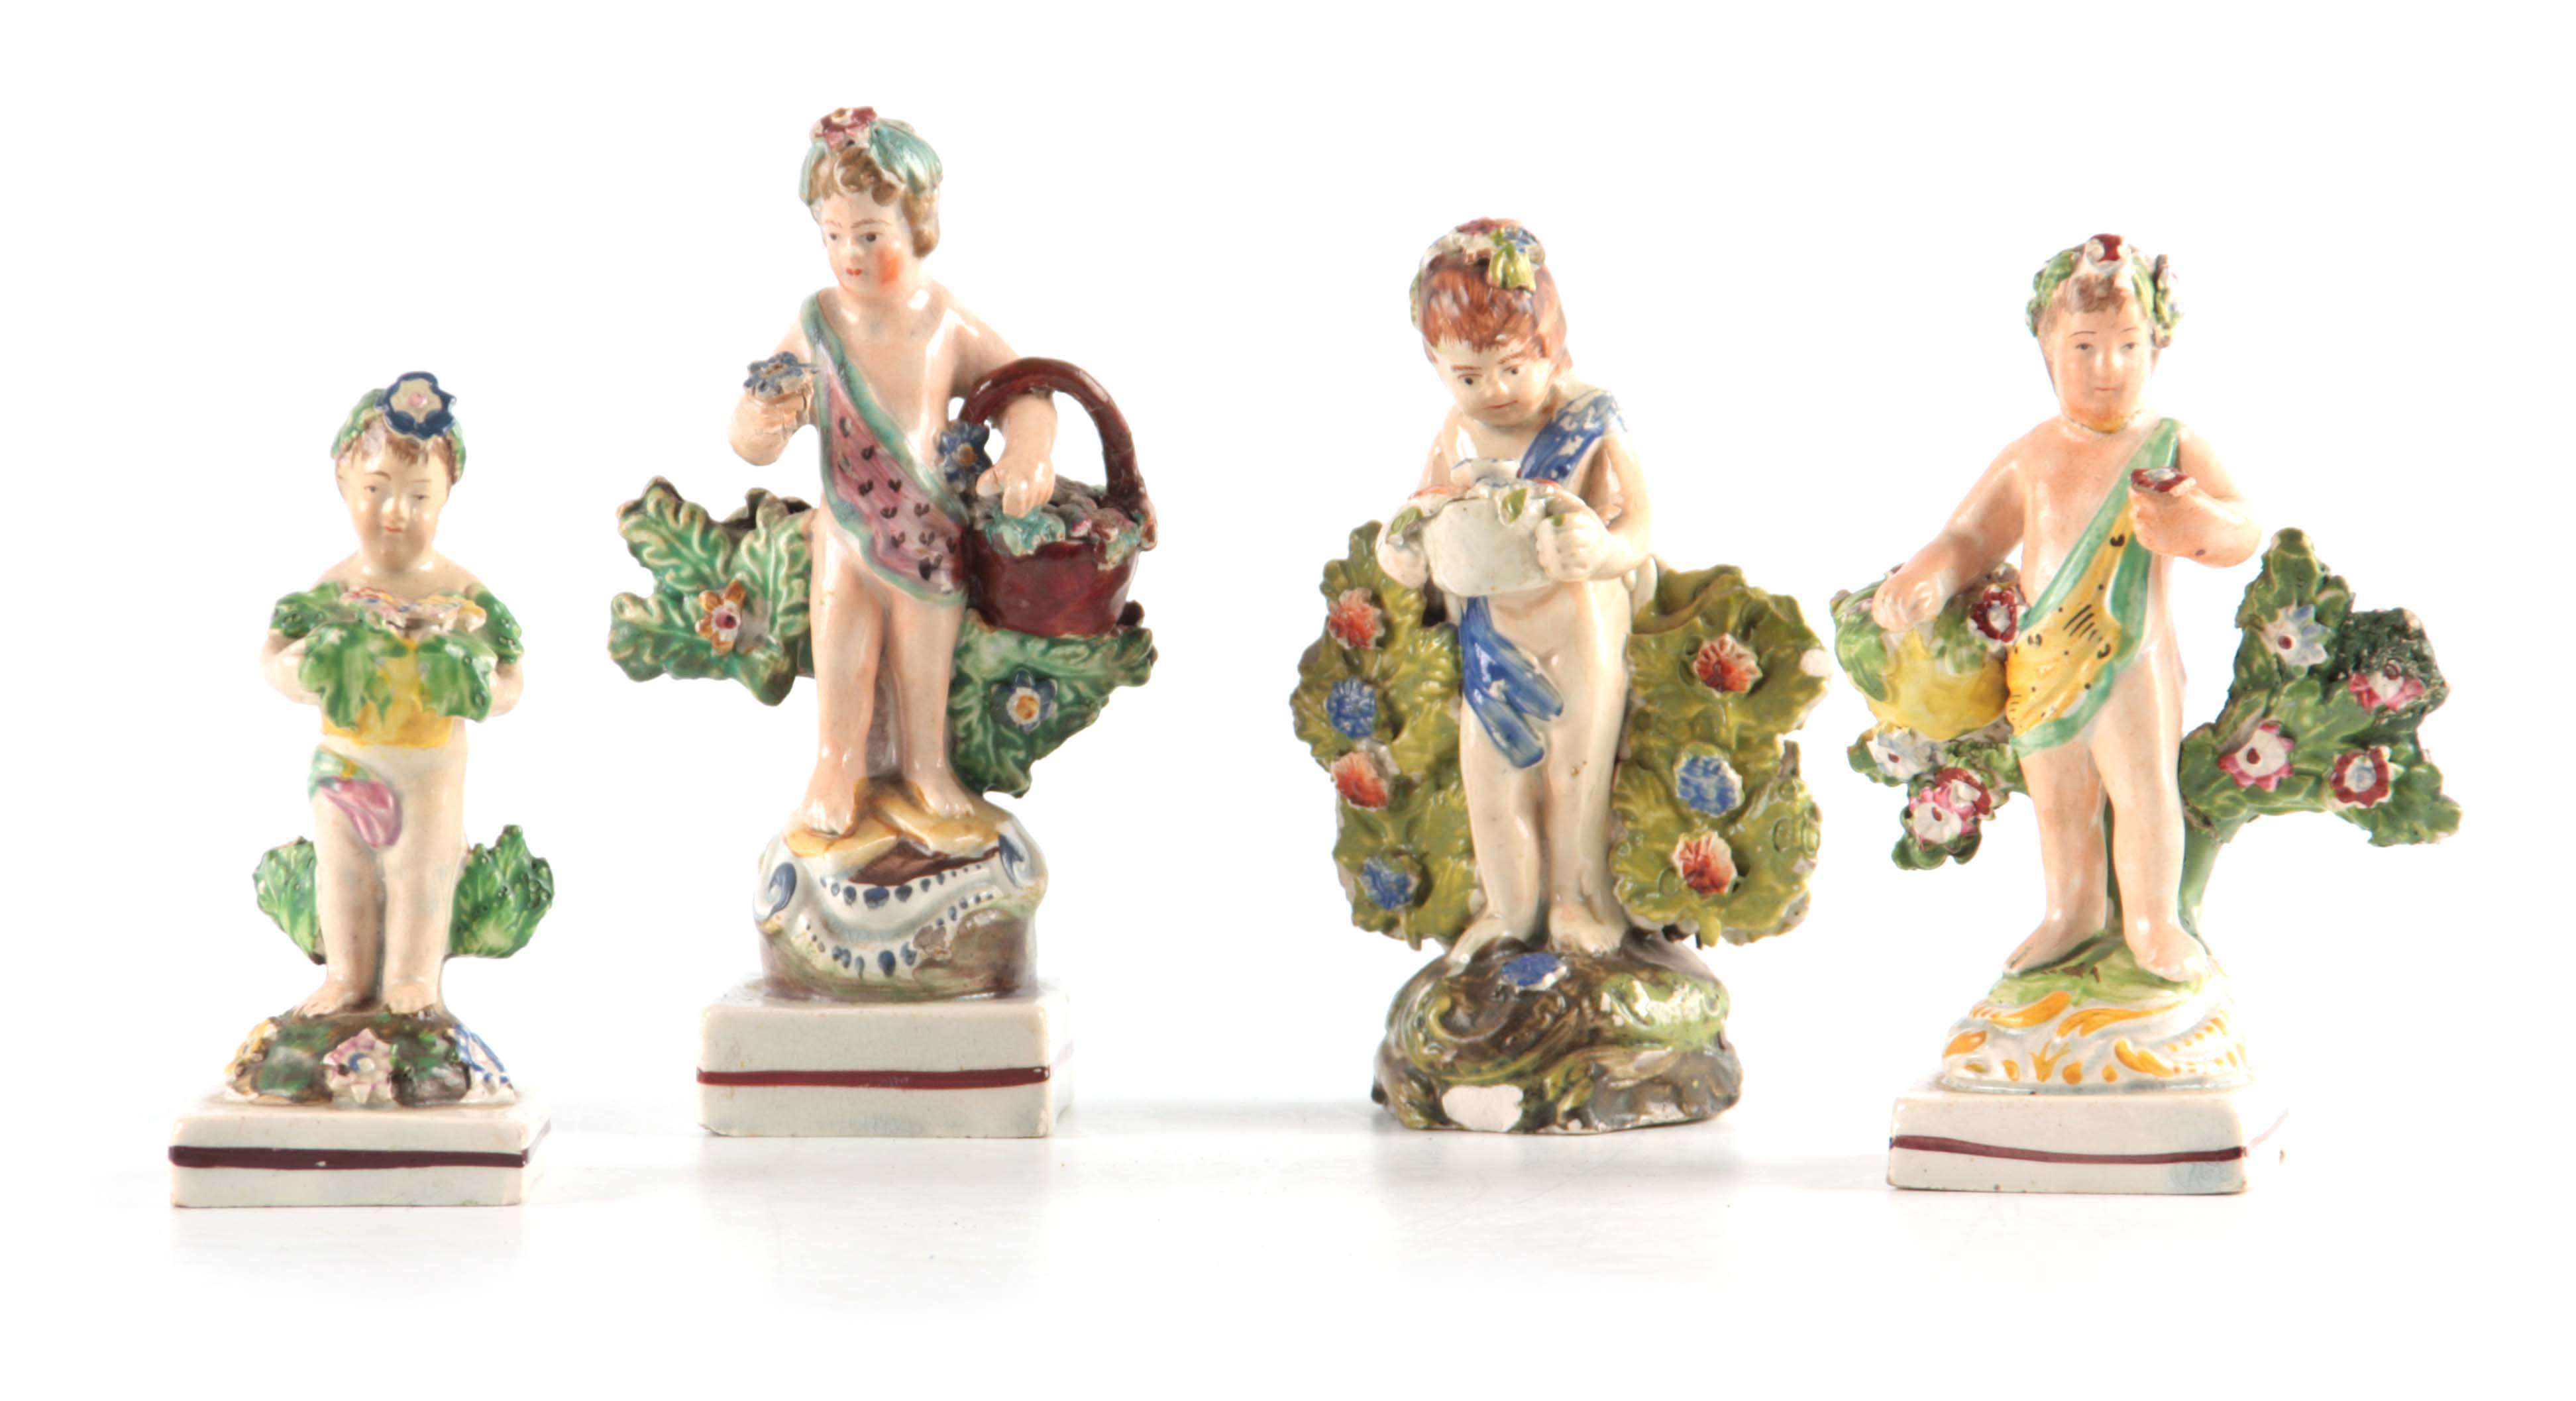 A SELECTION OF FOUR EARLY 19TH CENTURY STAFFORDSHIRE PEARLWARE FIGURES of cherubs holding various